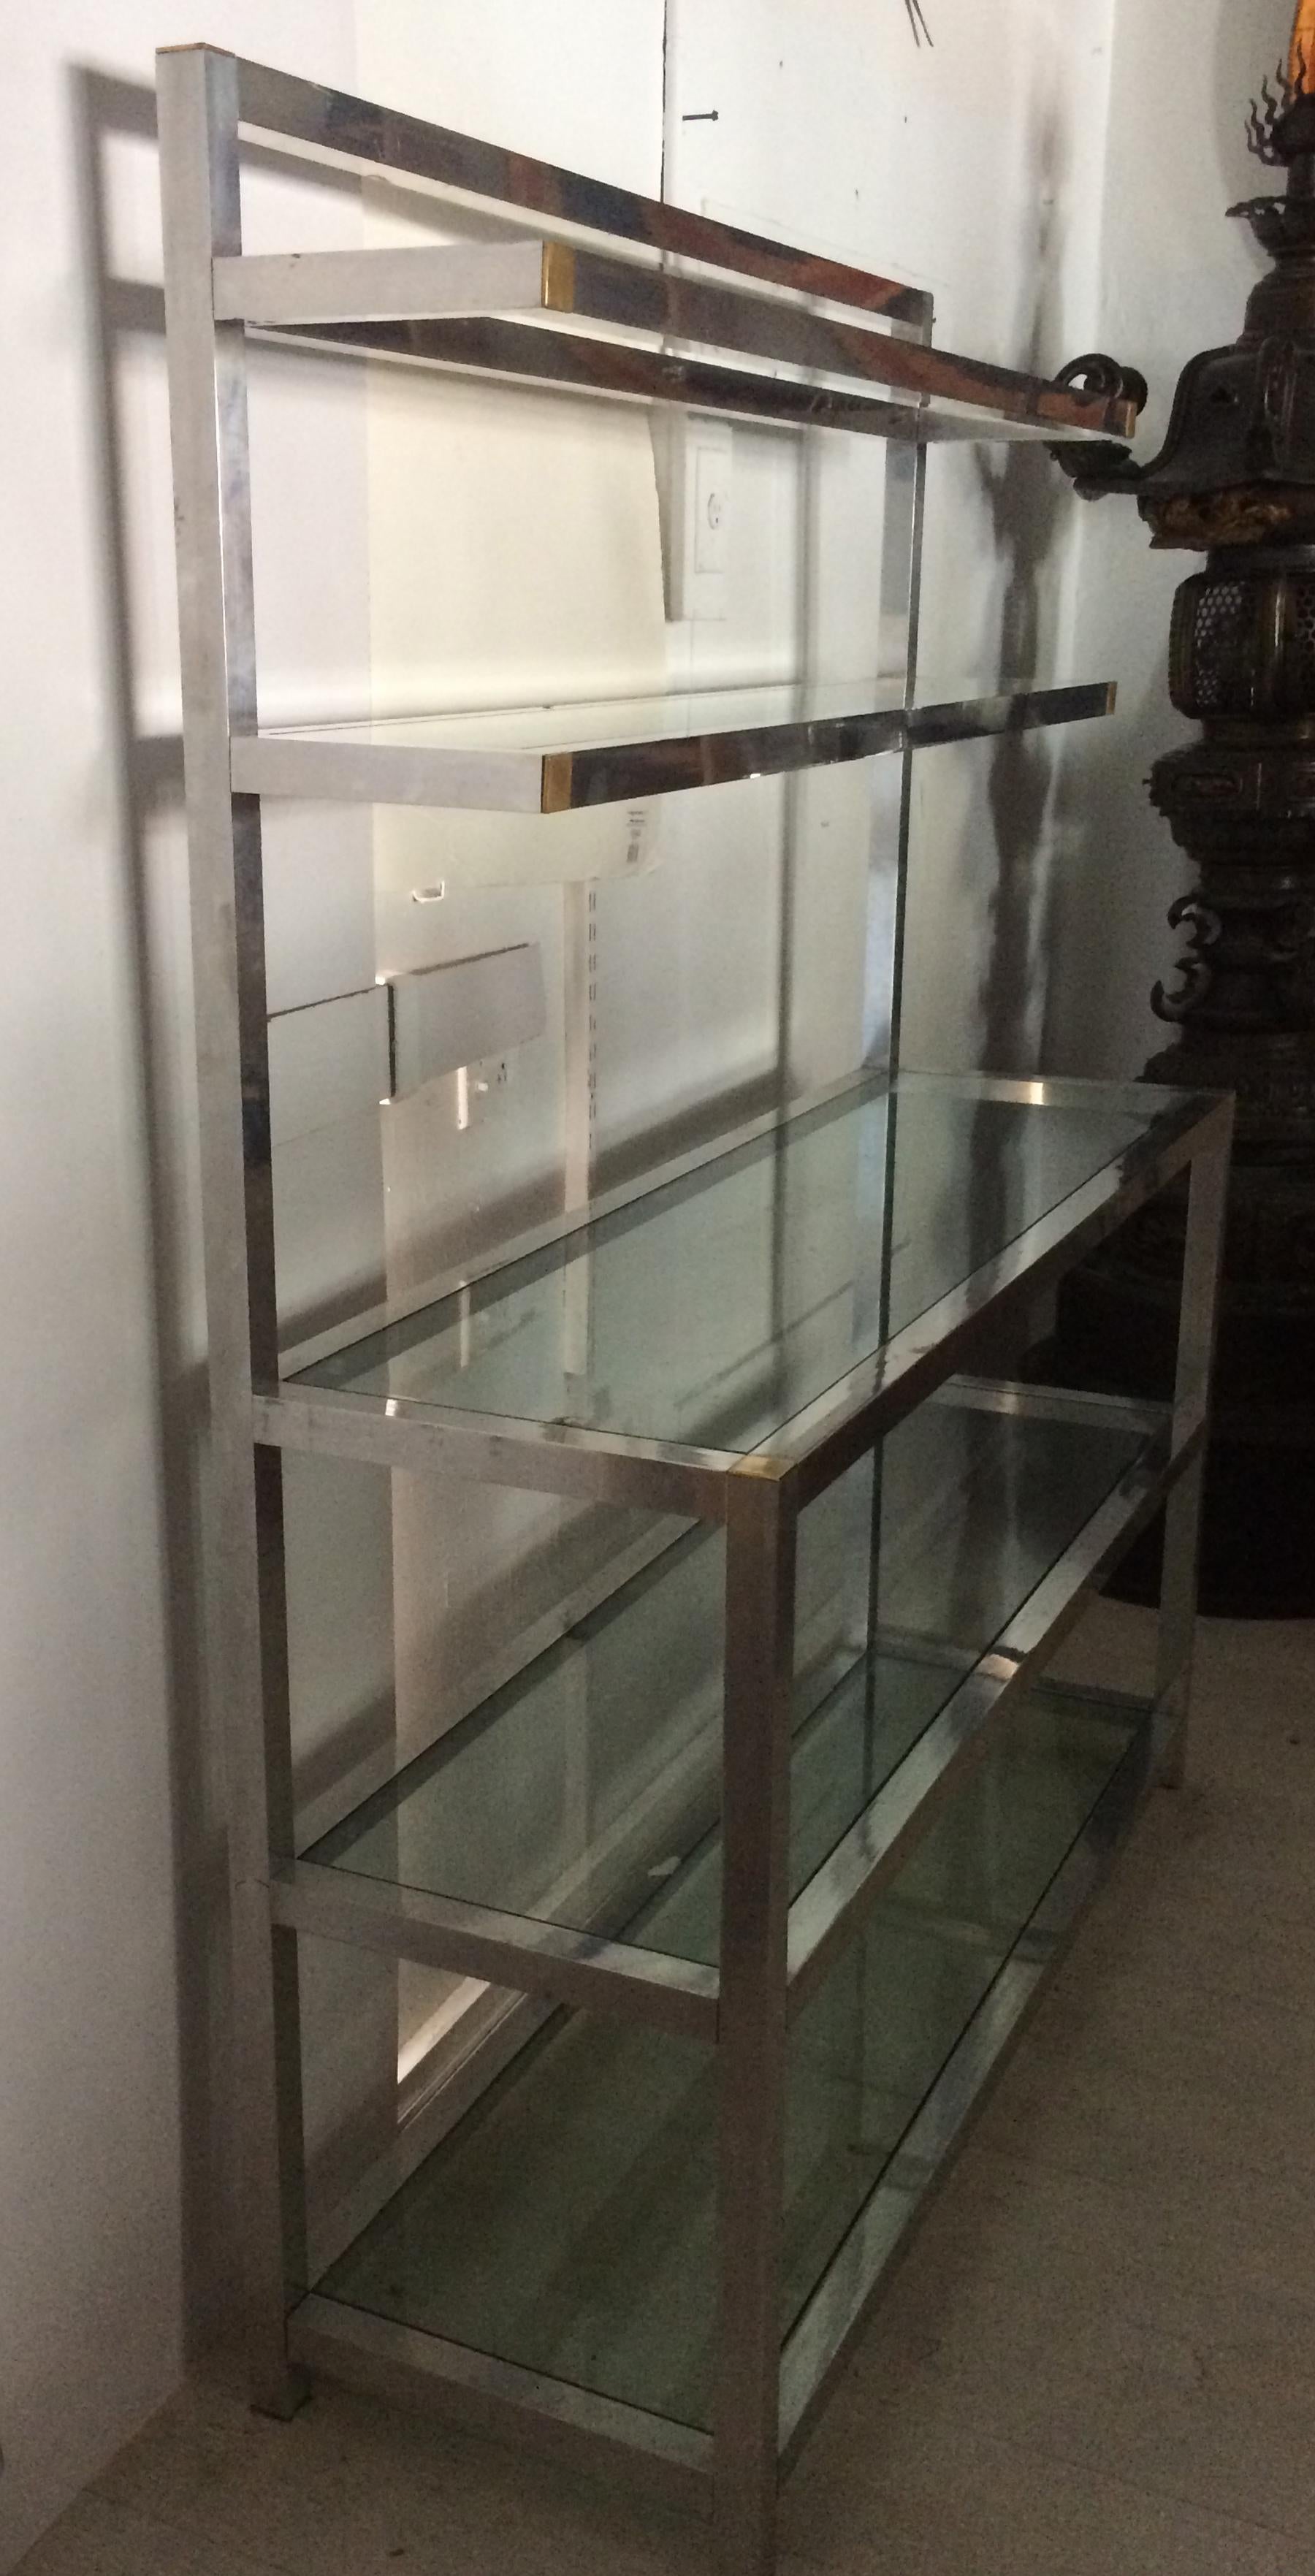 Step Back Polished Aluminium Display Shelf, 1970s In Excellent Condition For Sale In West Palm Beach, FL